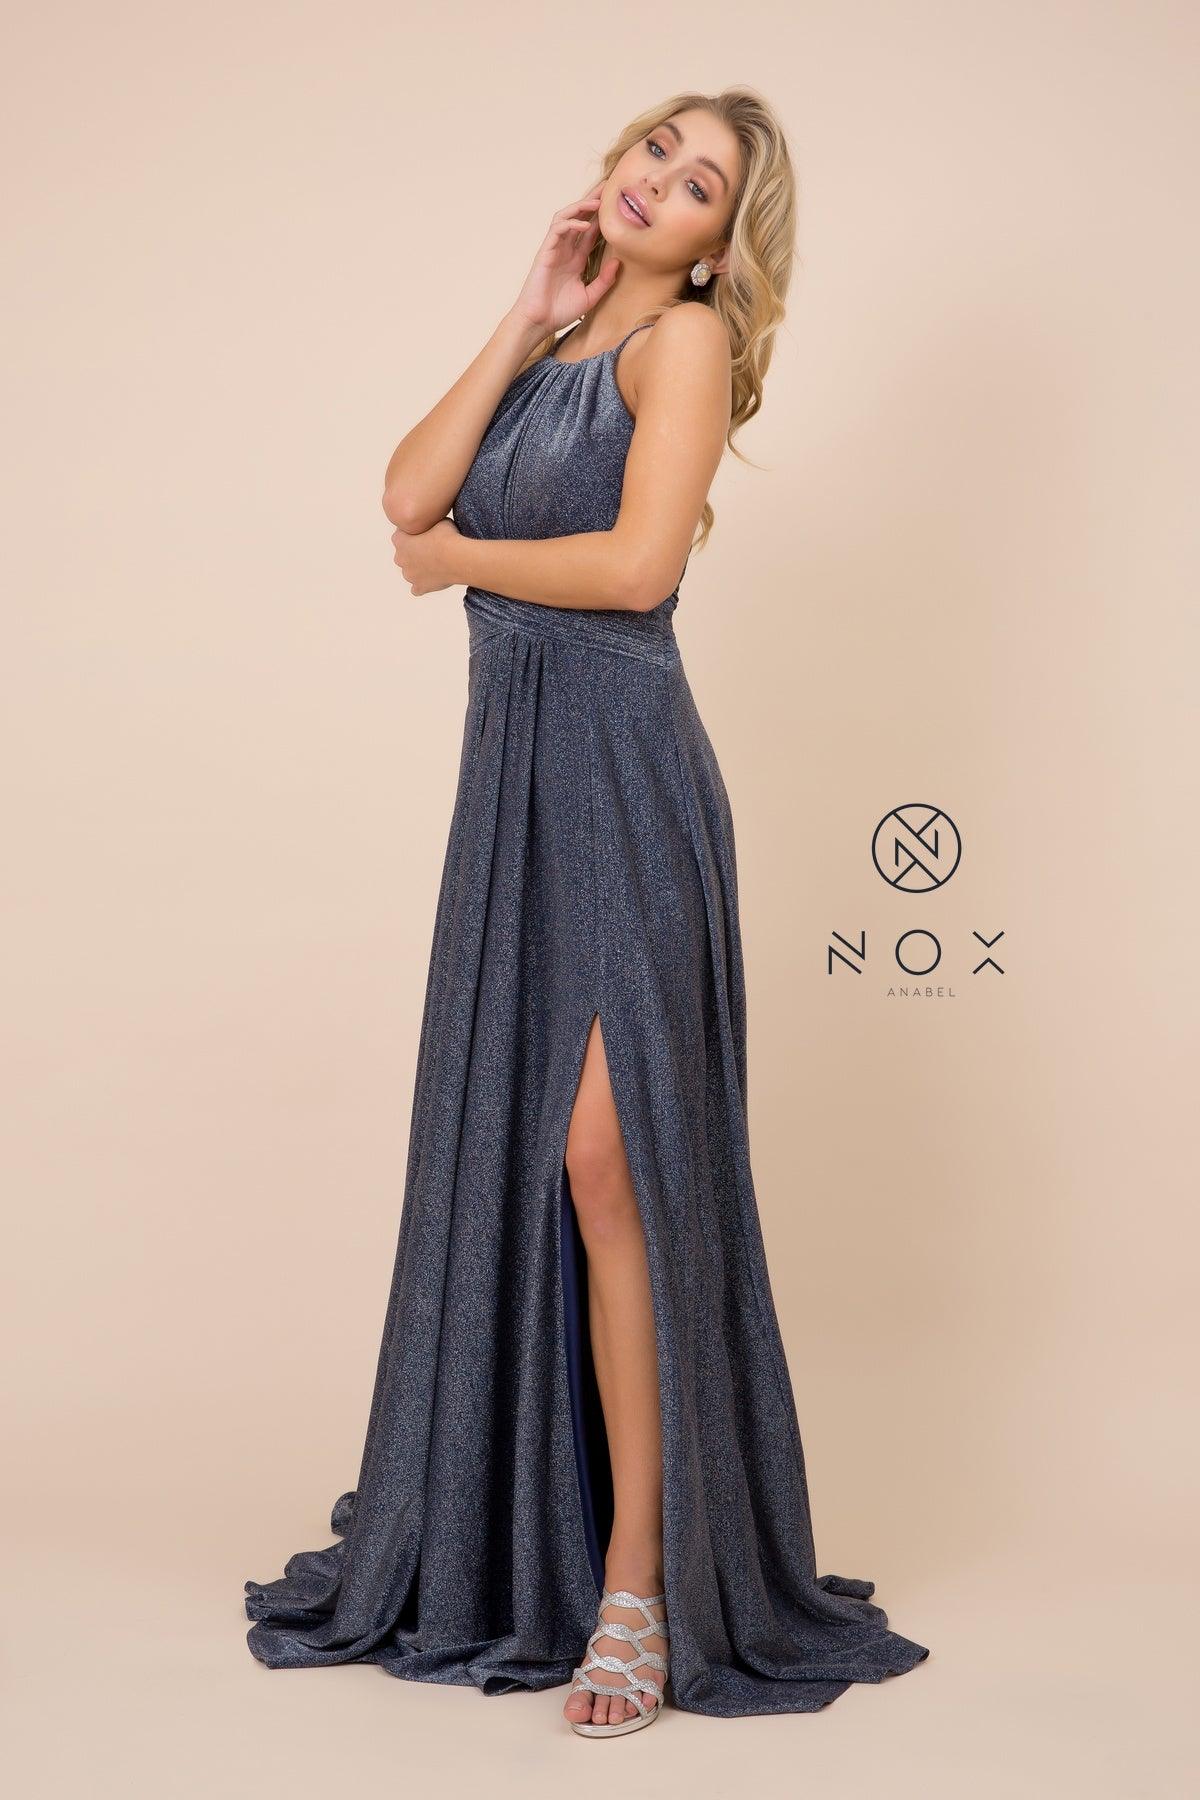 Long Metallic Prom Dress Formal Evening Gown - The Dress Outlet Nox Anabel